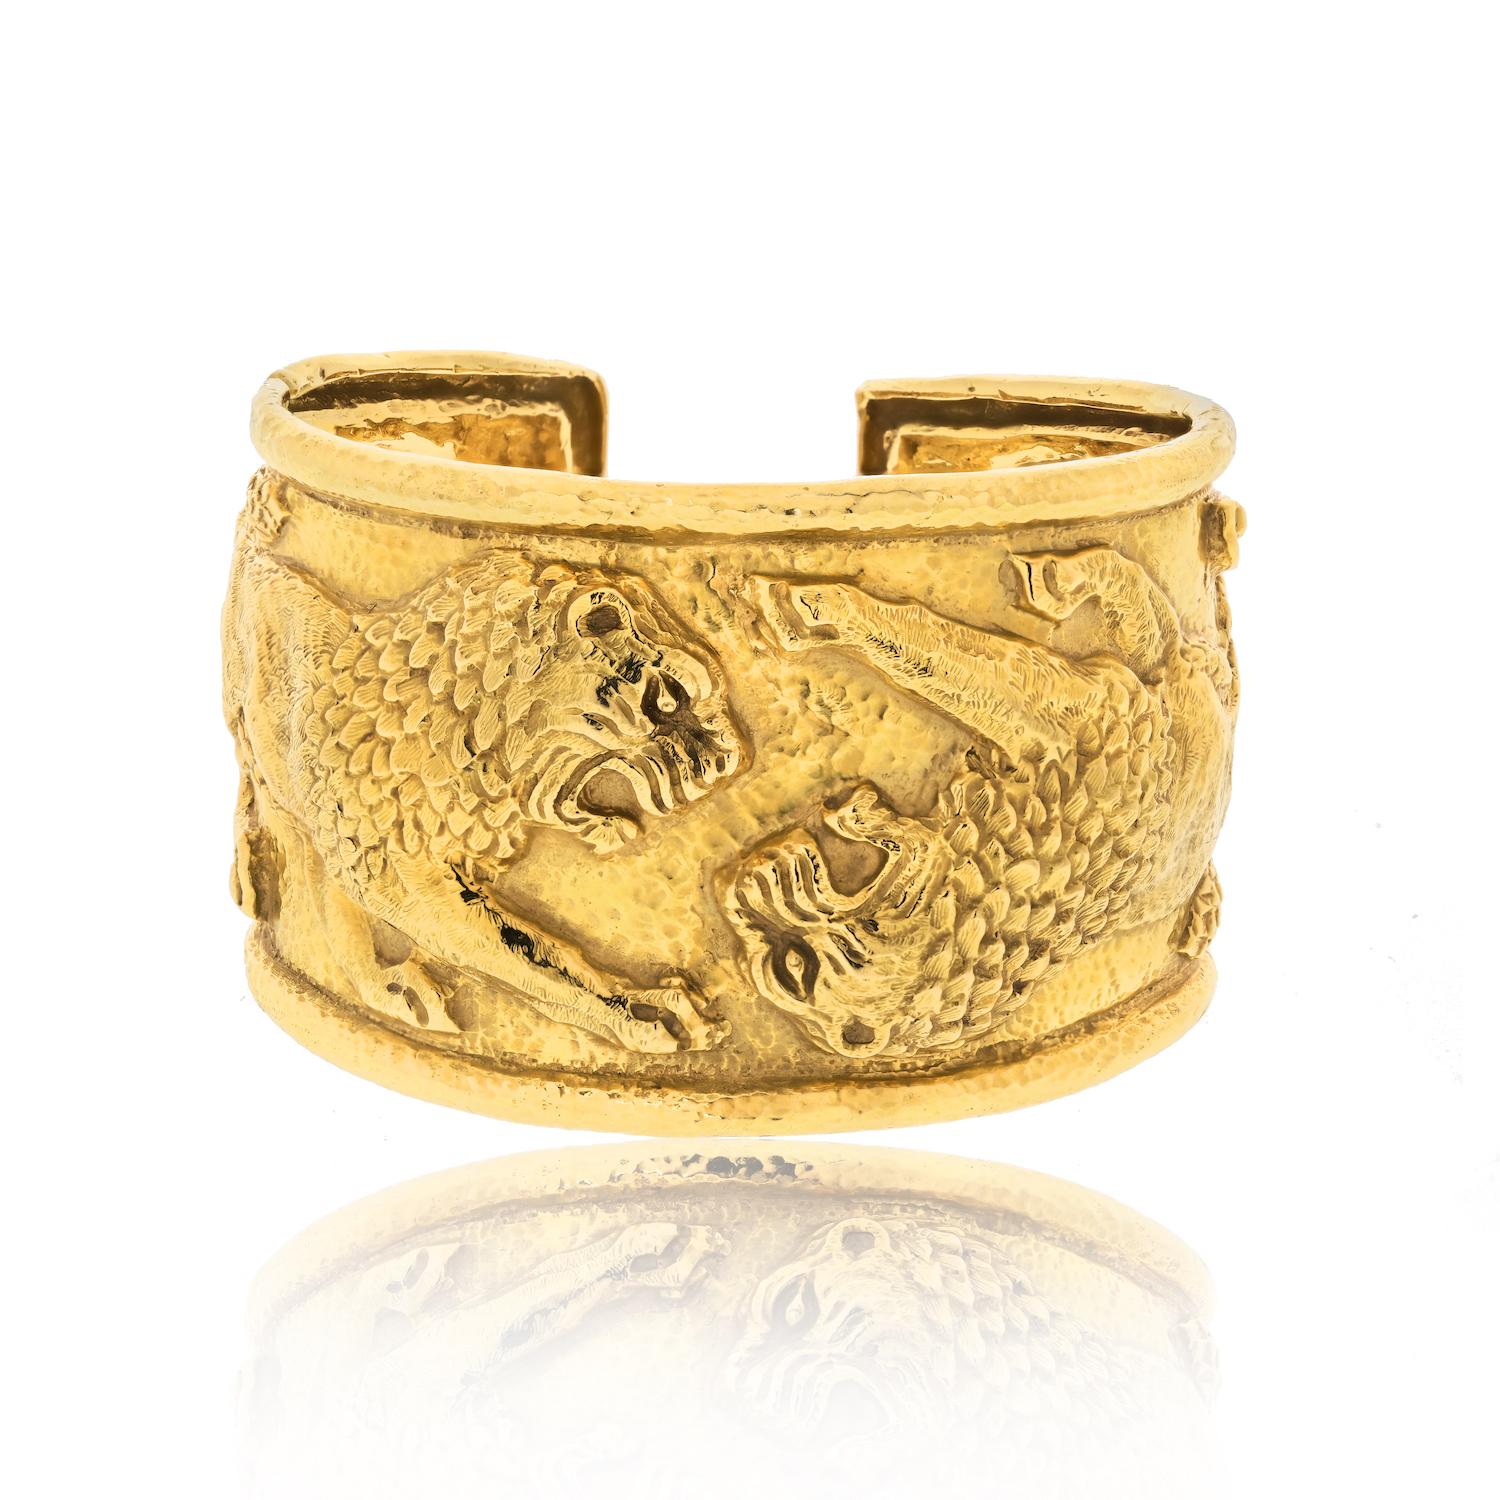 Prepare to be captivated by the timeless allure of this vintage David Webb cuff bracelet, exquisitely designed with two majestic lions facing each other. This bracelet showcases the unparalleled artistry and craftsmanship for which David Webb is